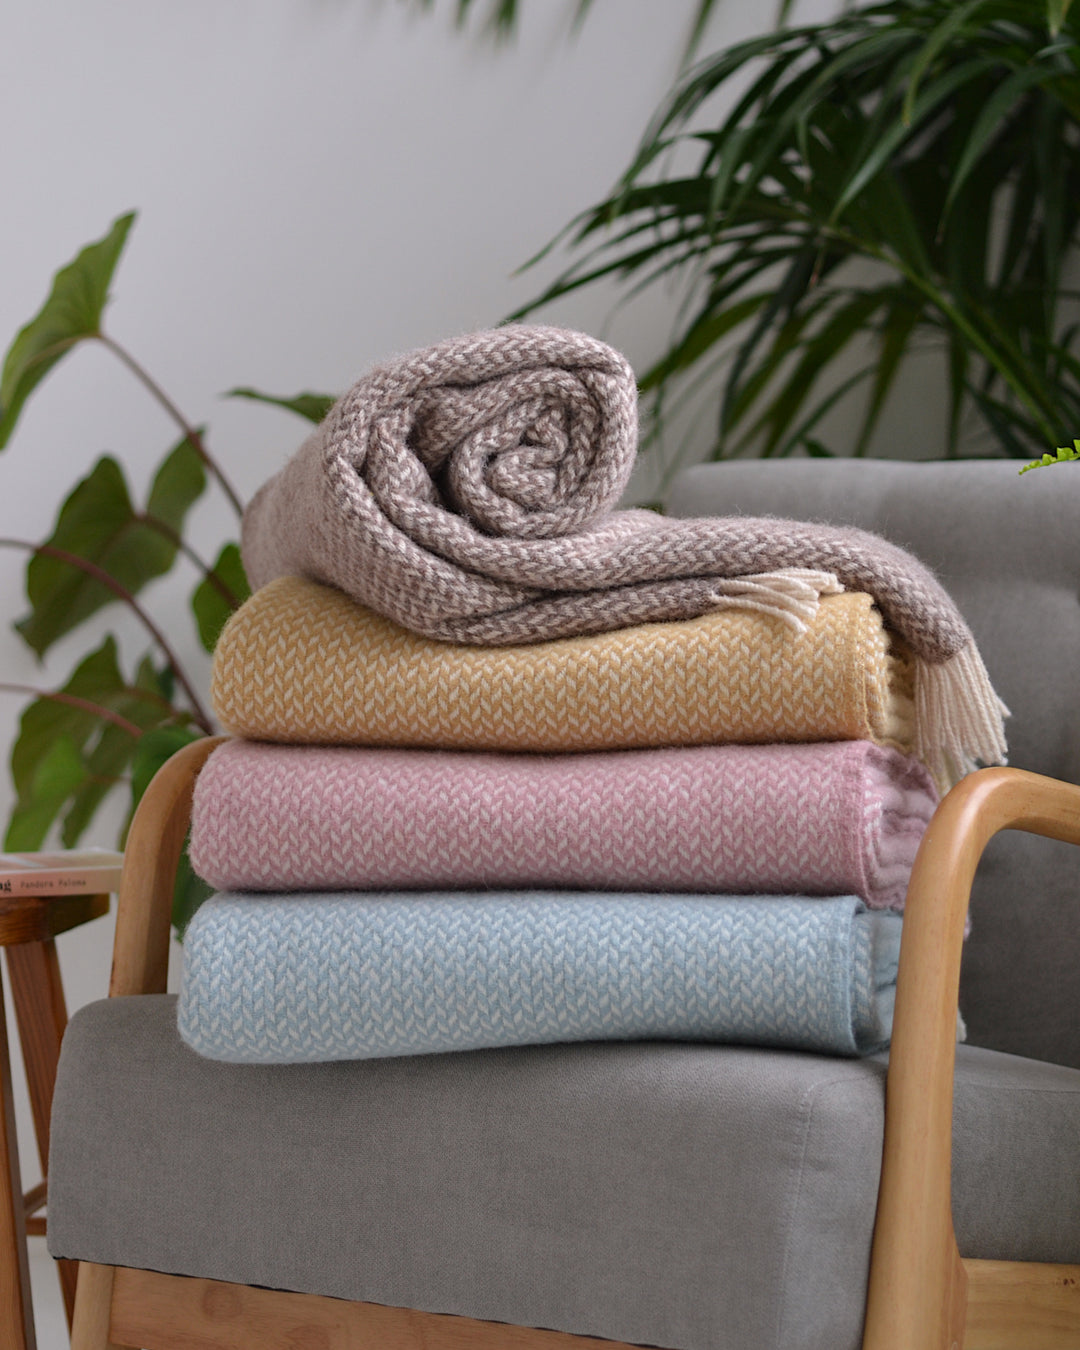 Four wool blankets stacked on a grey lounge chair.